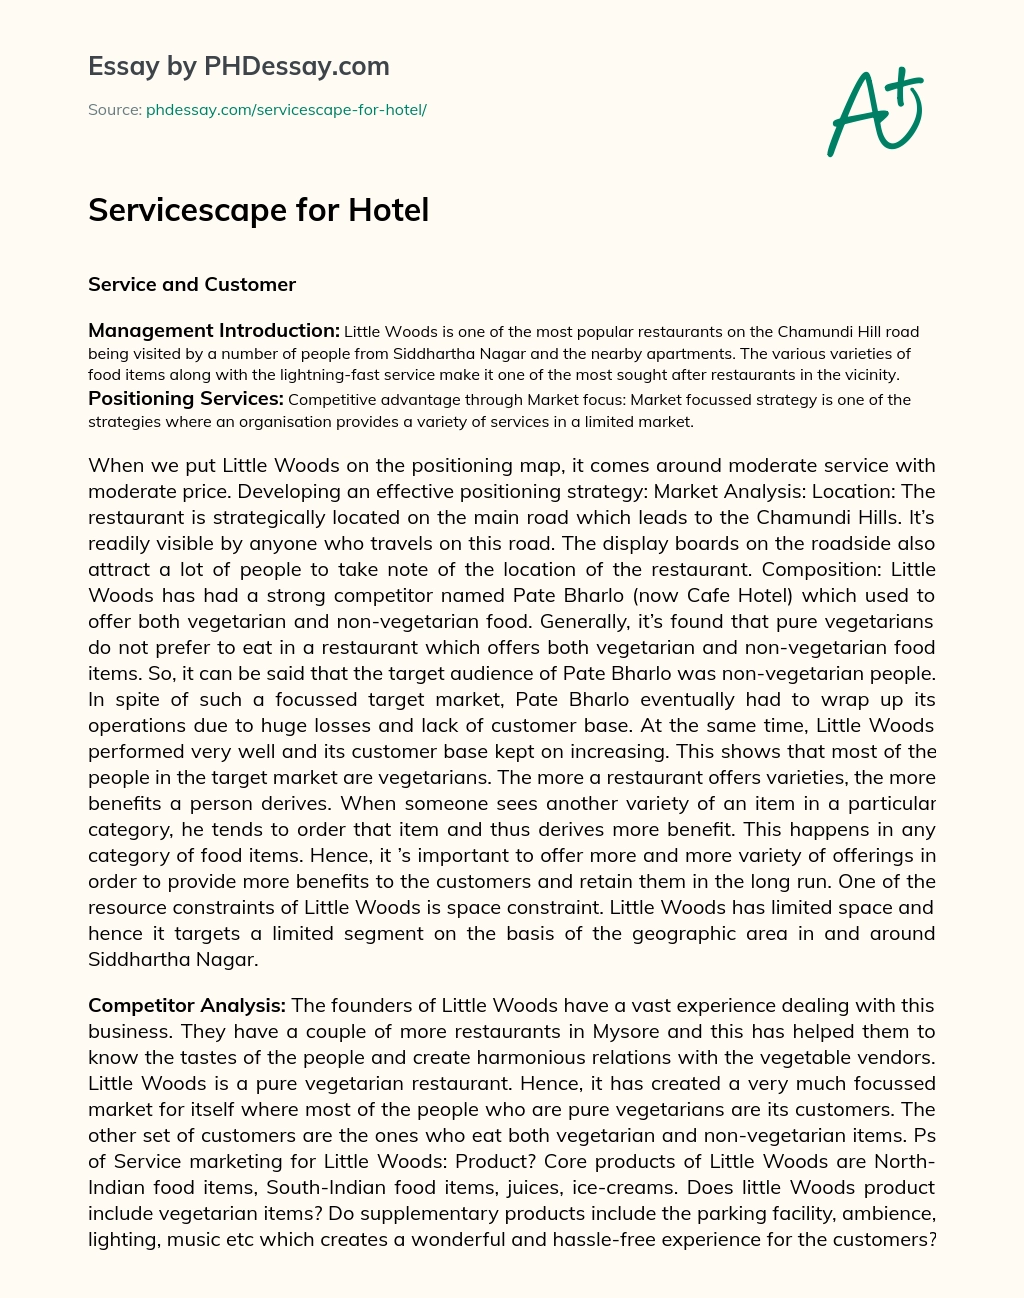 Servicescape for Hotel essay